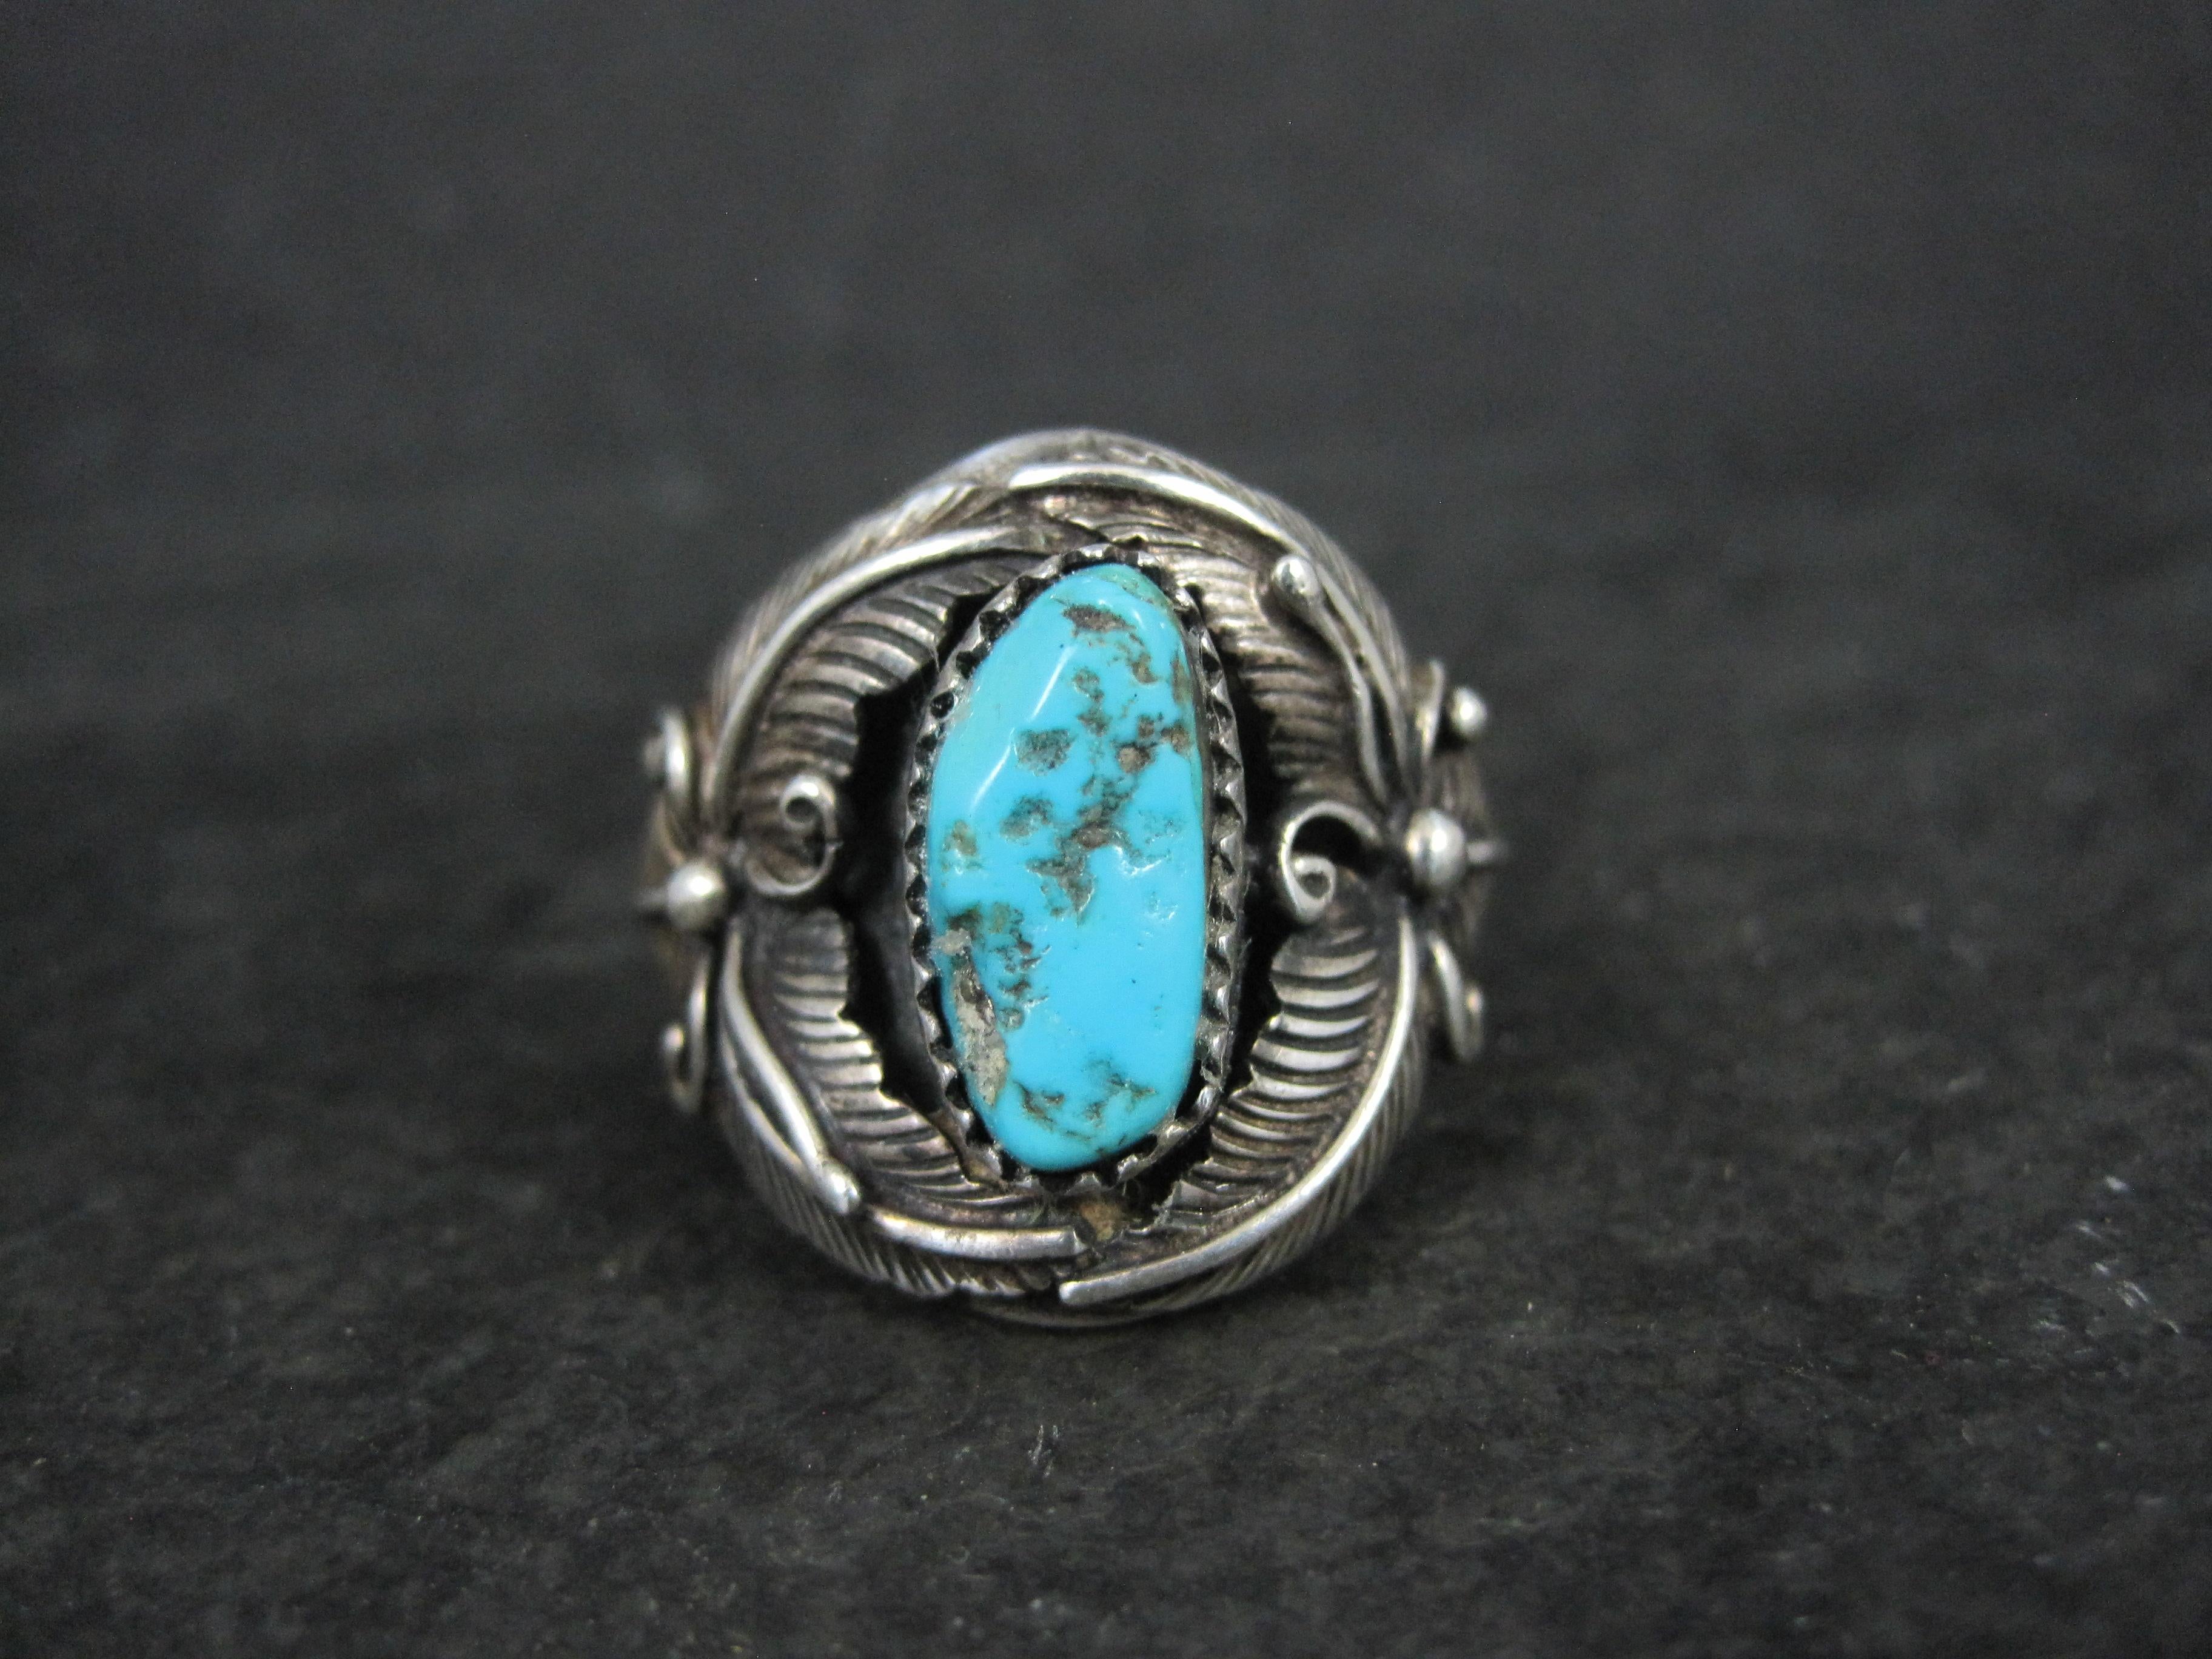 This gorgeous Southwestern ring is an unsigned beauty.

Measurements:
The face of the ring measures 15/16 of an inch from knuckle to knuckle.
The turquoise measures 7x15mm.

The ring is a size 9.

Marks: Sterling